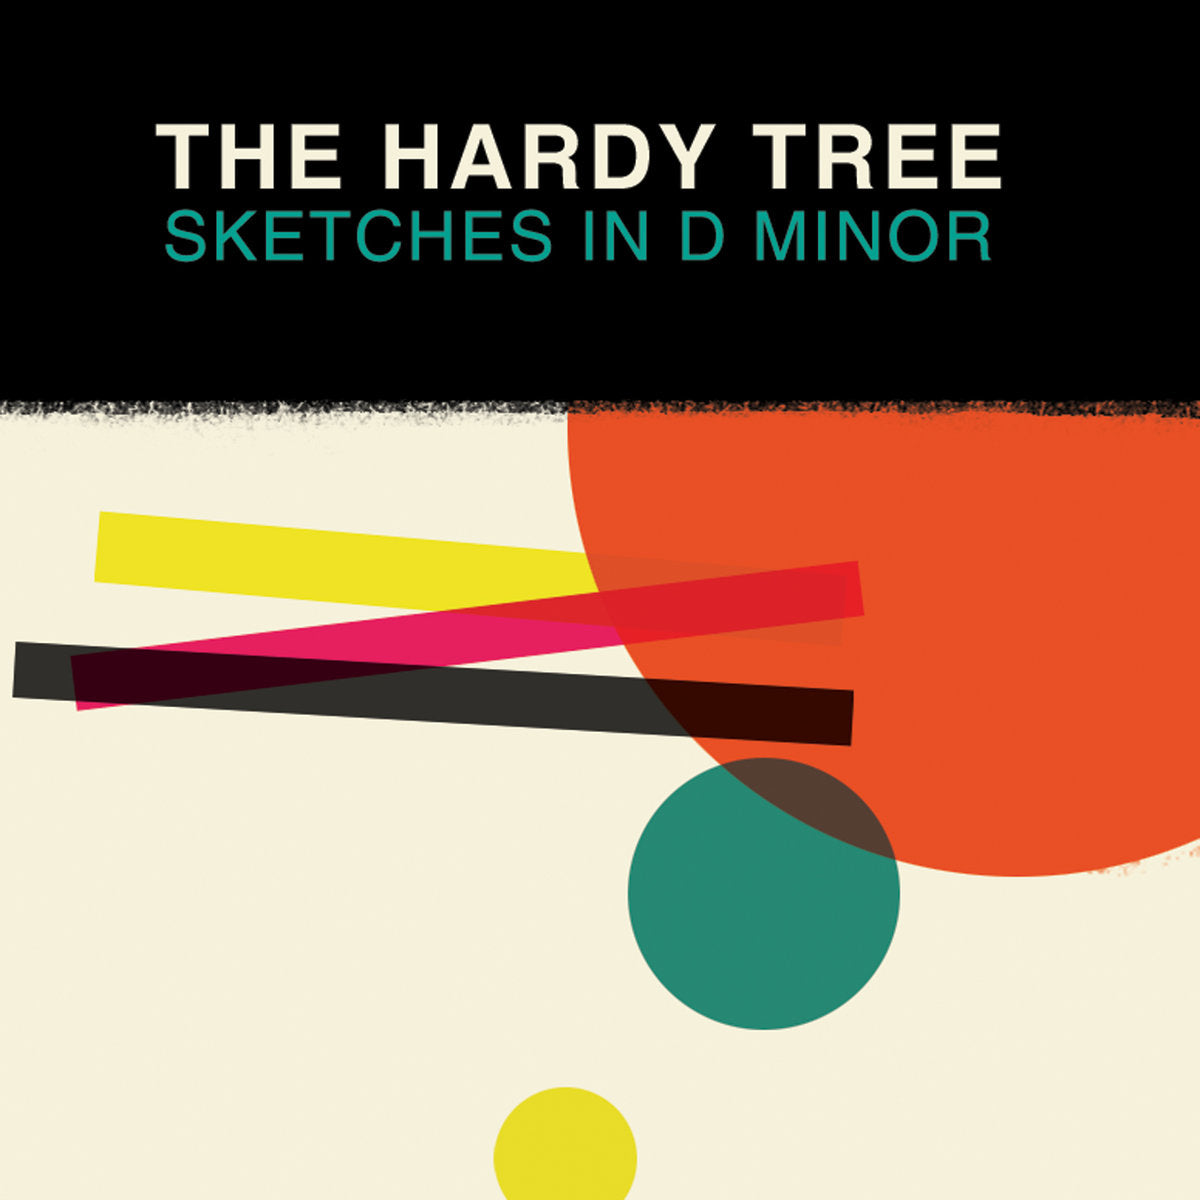 The Hardy Tree - Sketches in D Minor. Frances Castle / Clay Pipe Music.